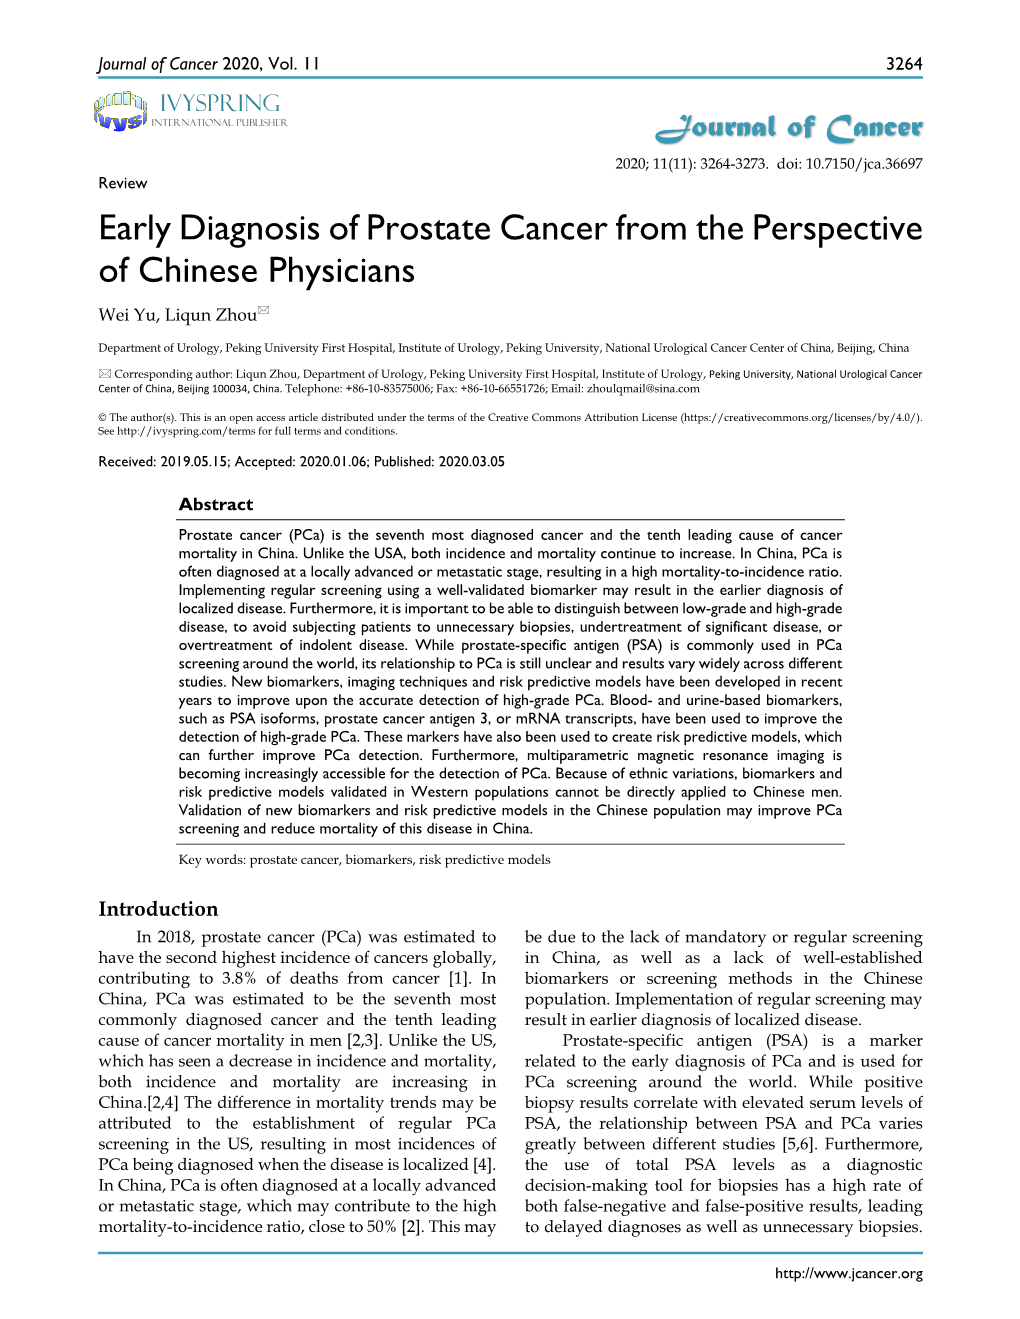 Early Diagnosis of Prostate Cancer from the Perspective of Chinese Physicians Wei Yu, Liqun Zhou